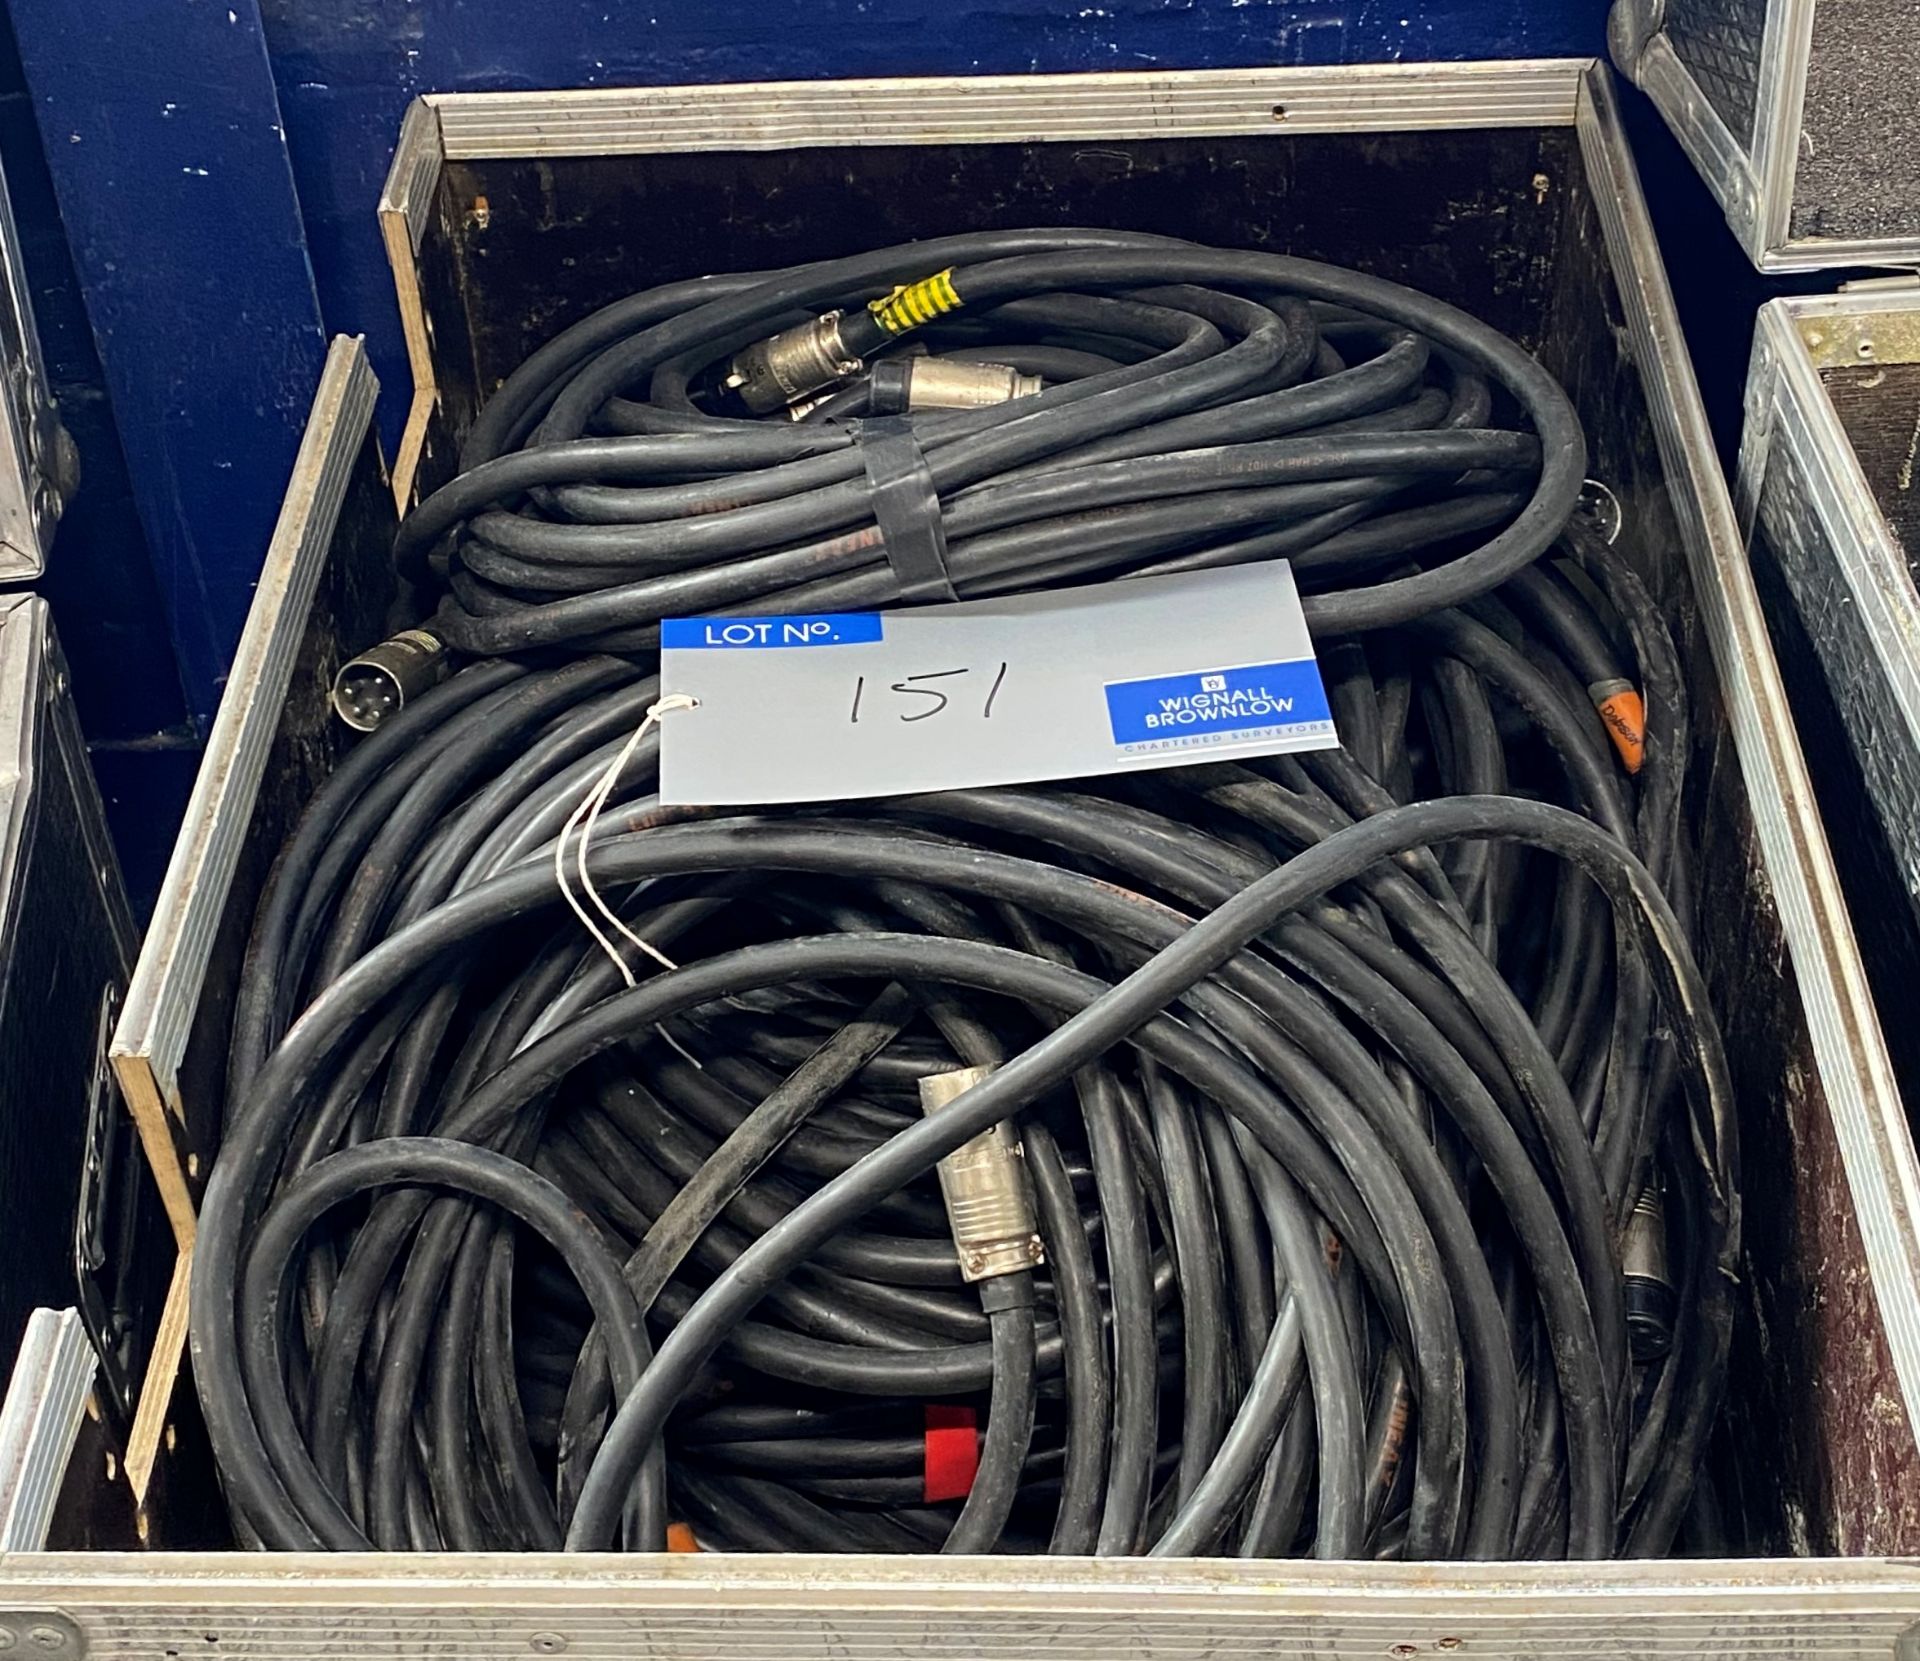 A Quantity of EP5 20M+ Cable with case (located at 17 Deer Park Road, London, SW19 3QG).